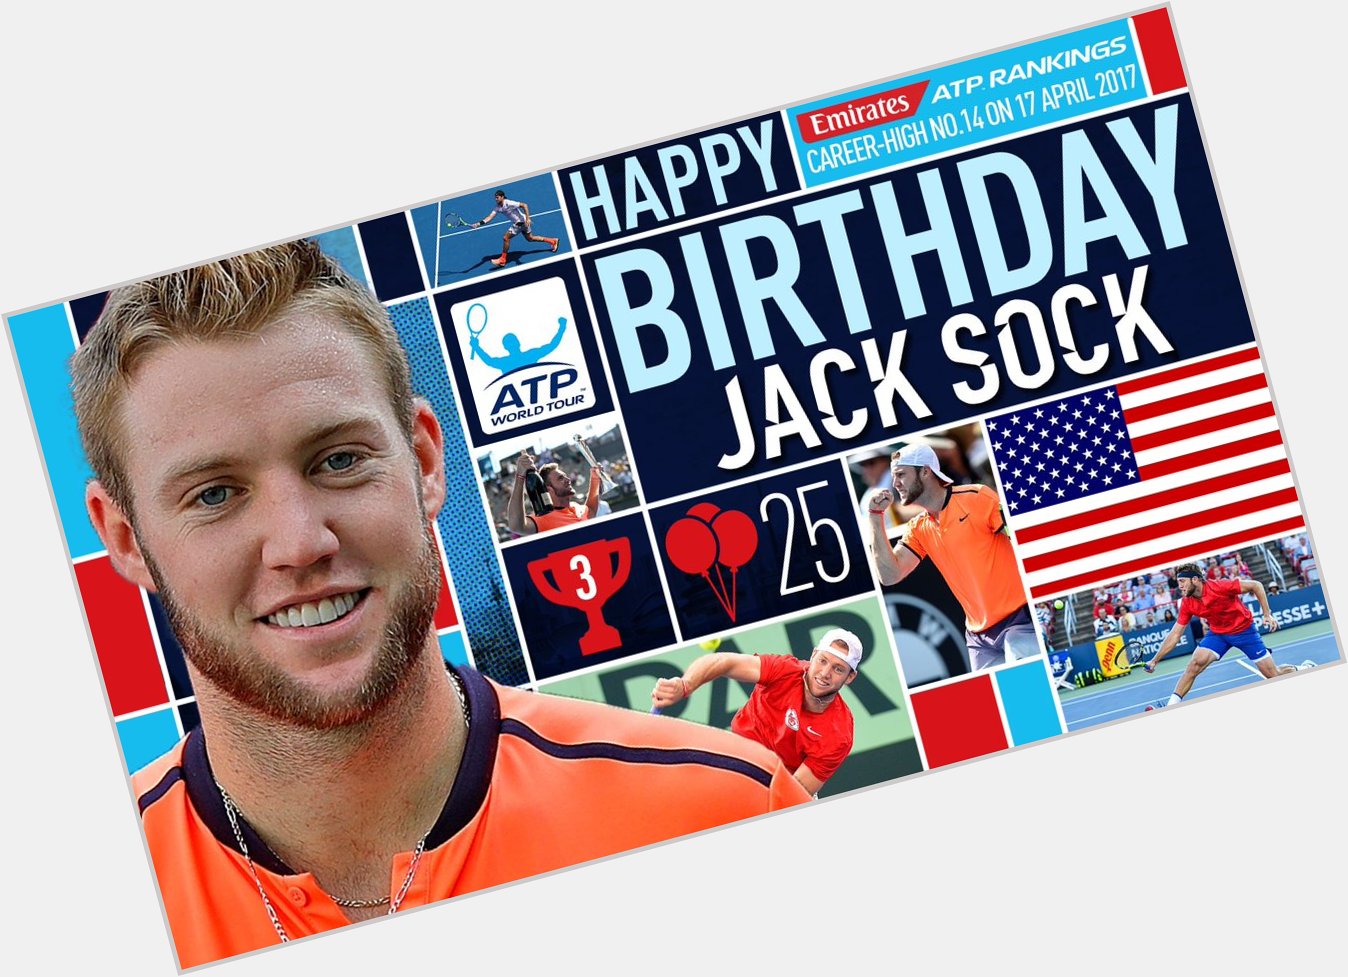  time for The  turns 25 today. Happy birthday, Jack!

Profile  